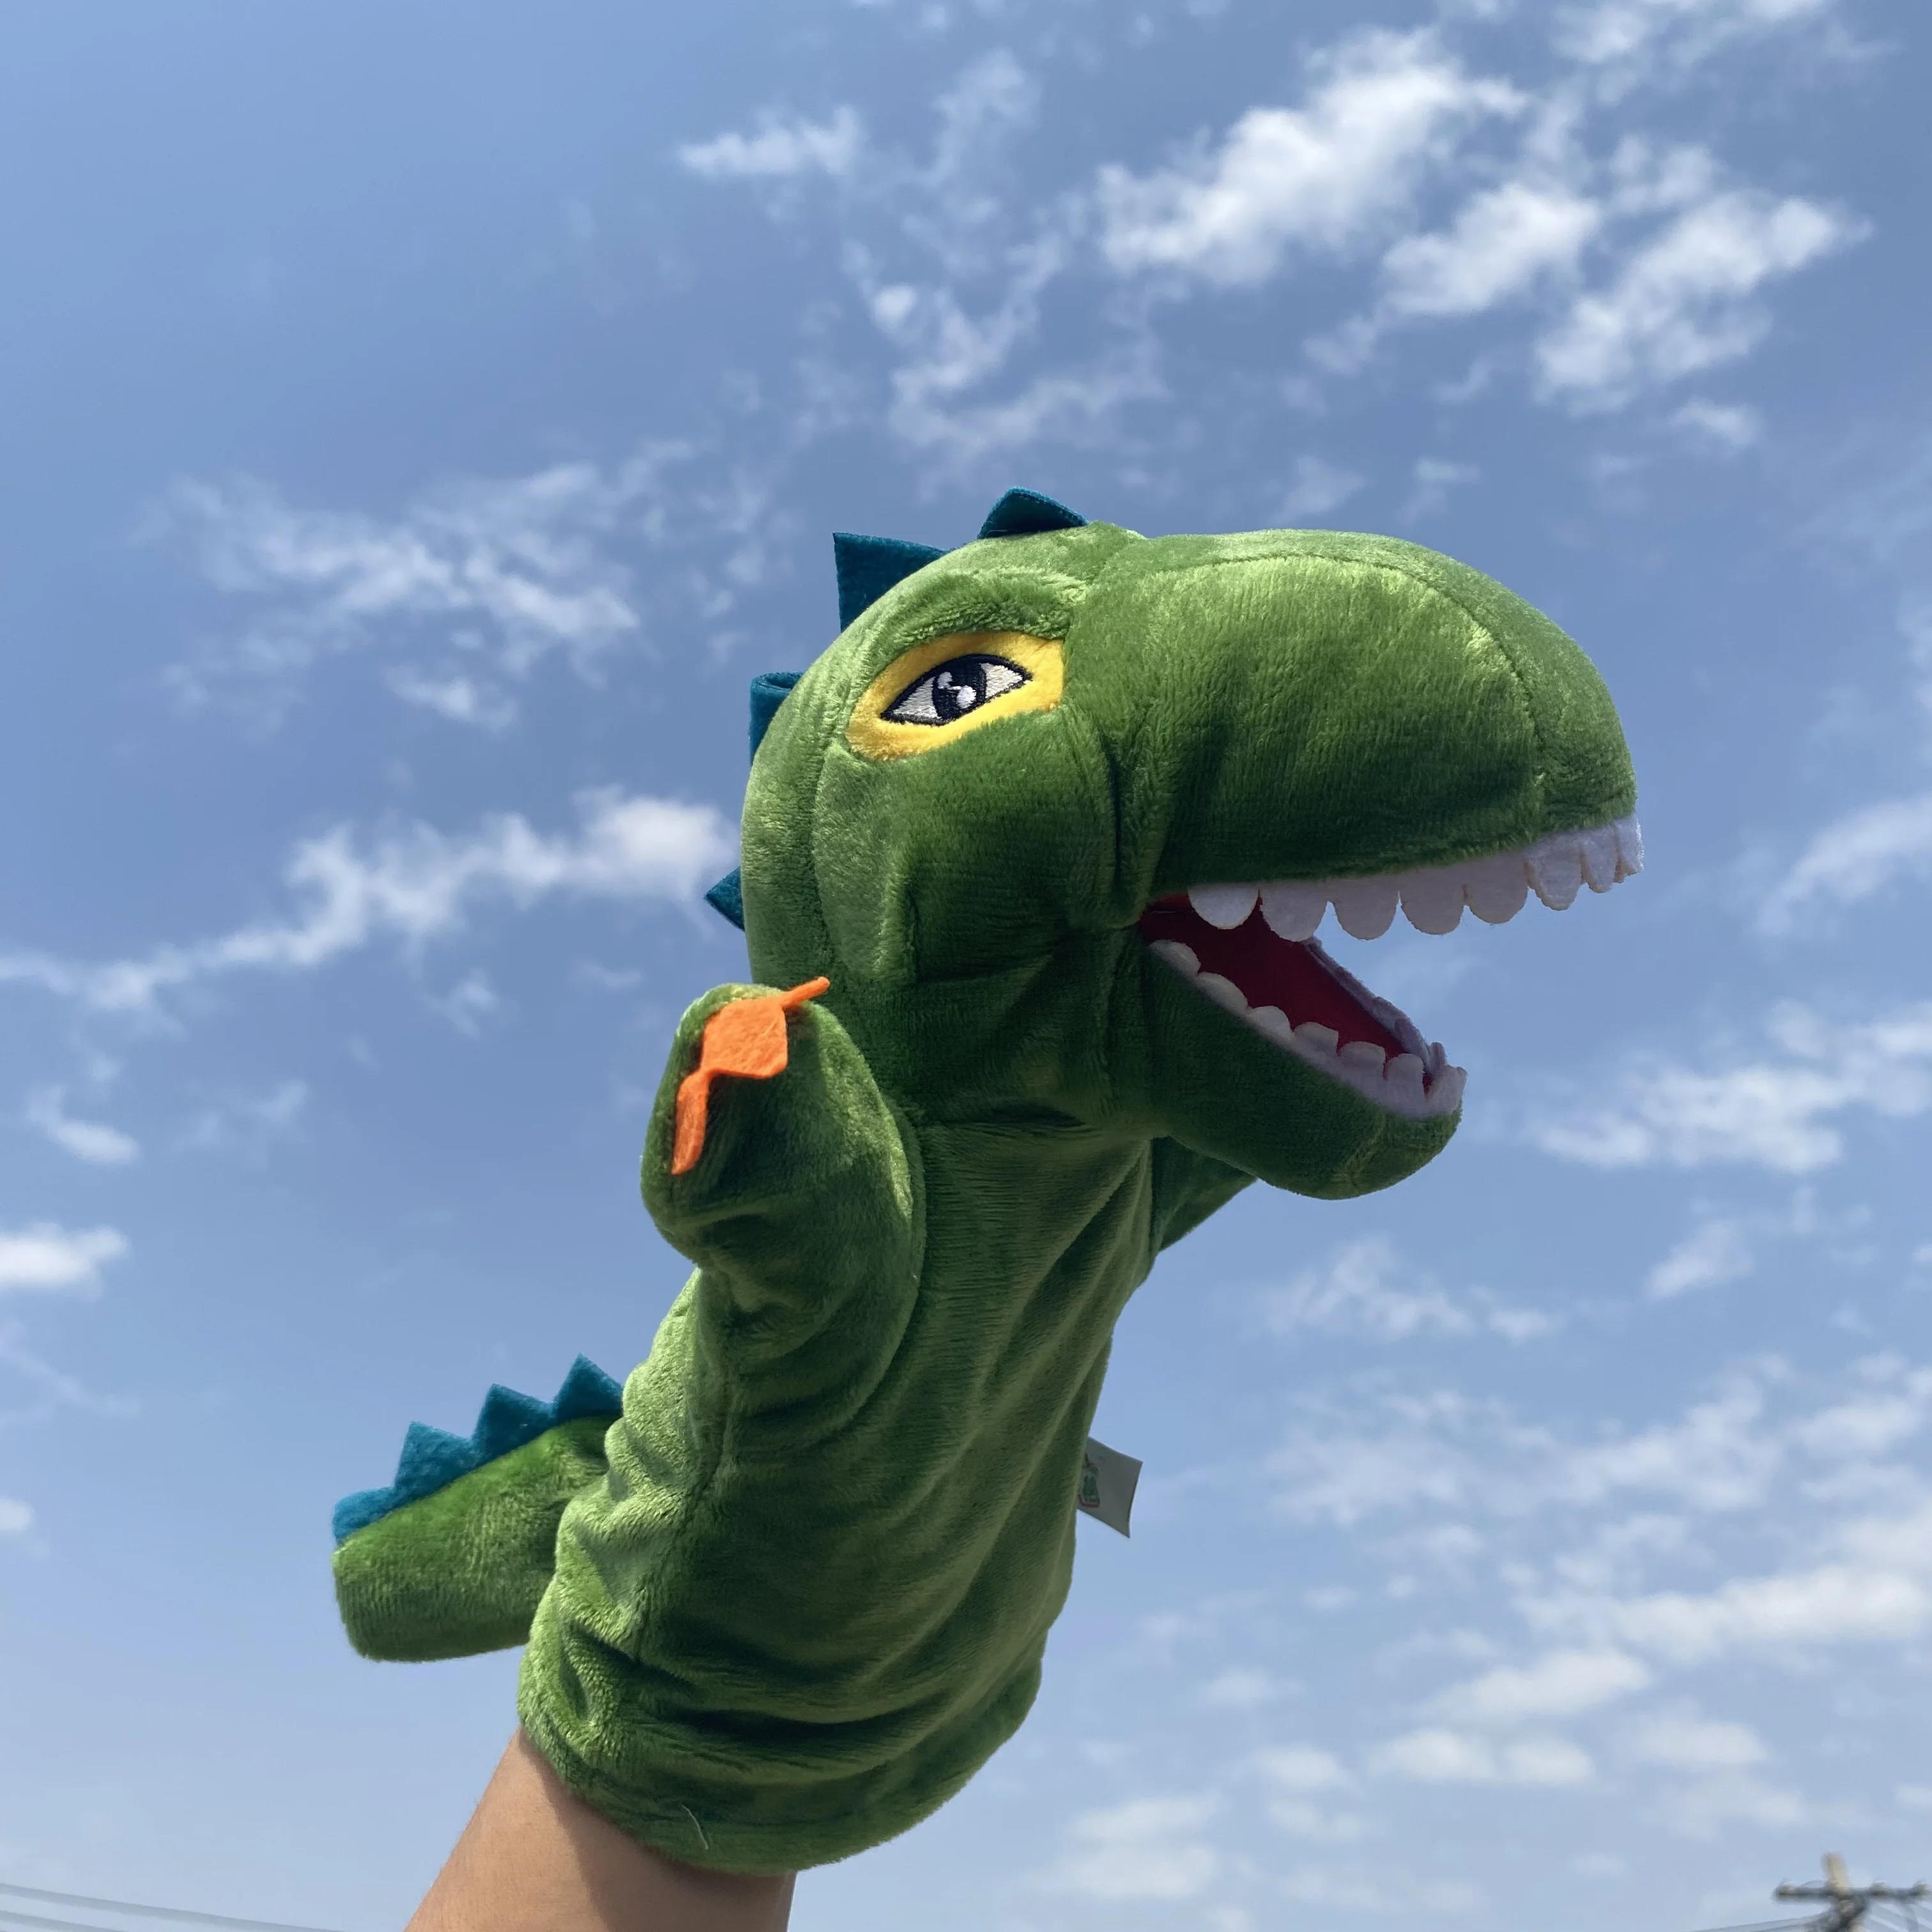 

Dinosaur puppets hand puppet theater doll toys marionette glove plush doll storys talking juguetes Learning Aid funny gift kids